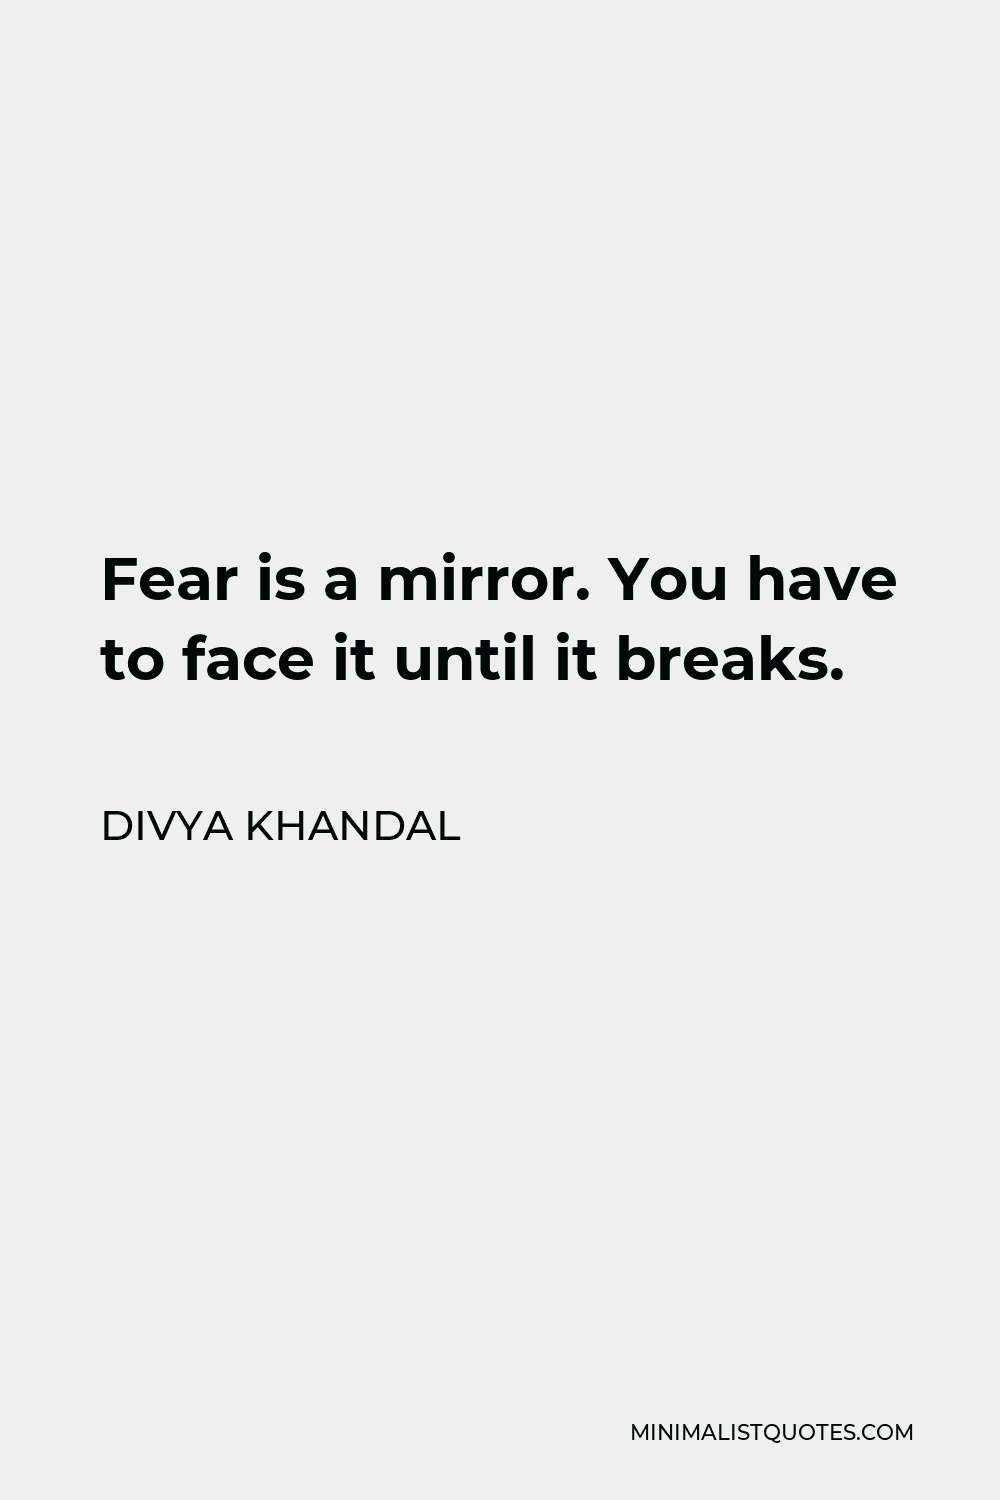 Divya khandal Quote - Fear is a mirror. You have to face it until it breaks.